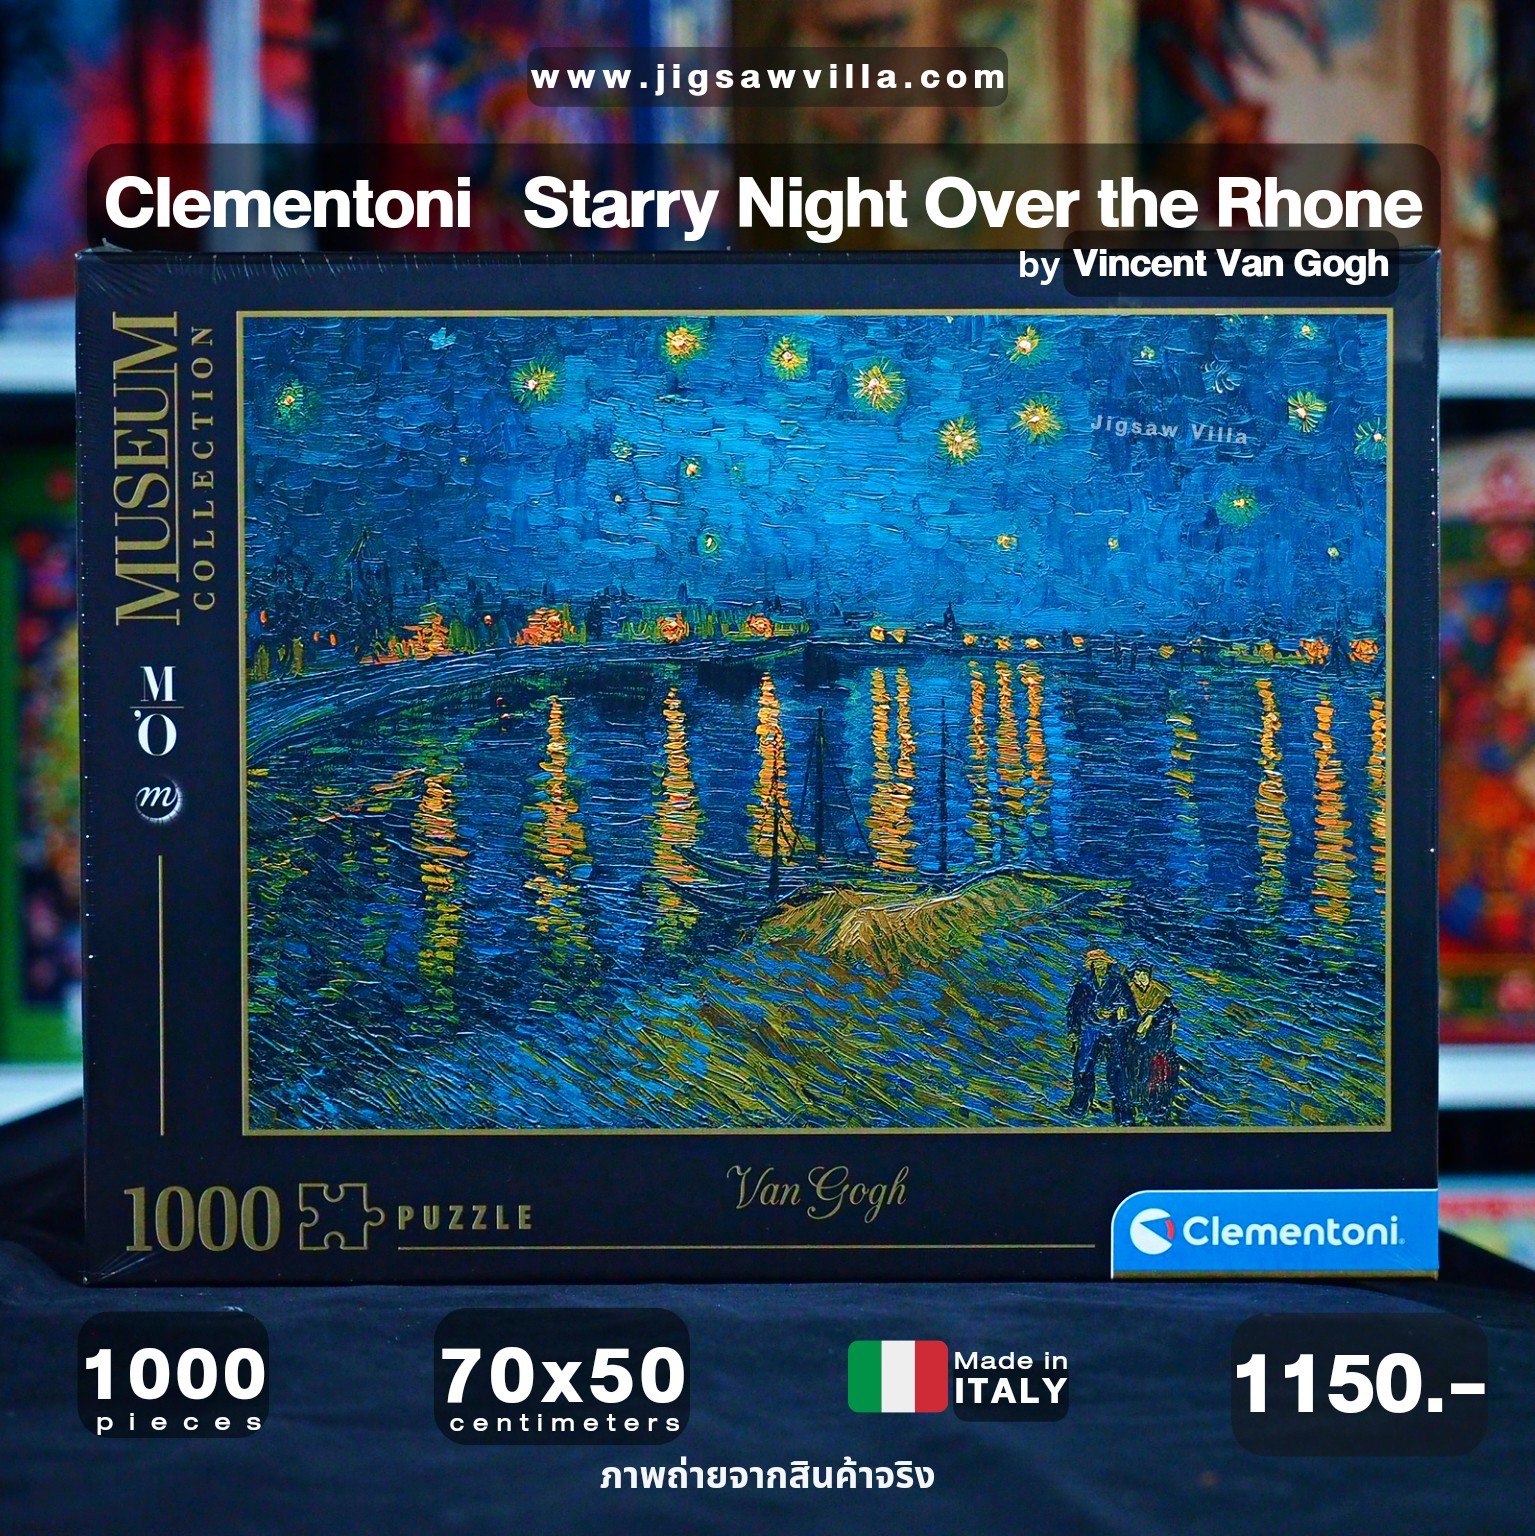 Clementoni - Museum Collection : Starry Night Over The Rhone by Vincent Van  Gogh 1000 pcs. - Jigsaw Villa : Inspired by LnwShop.com